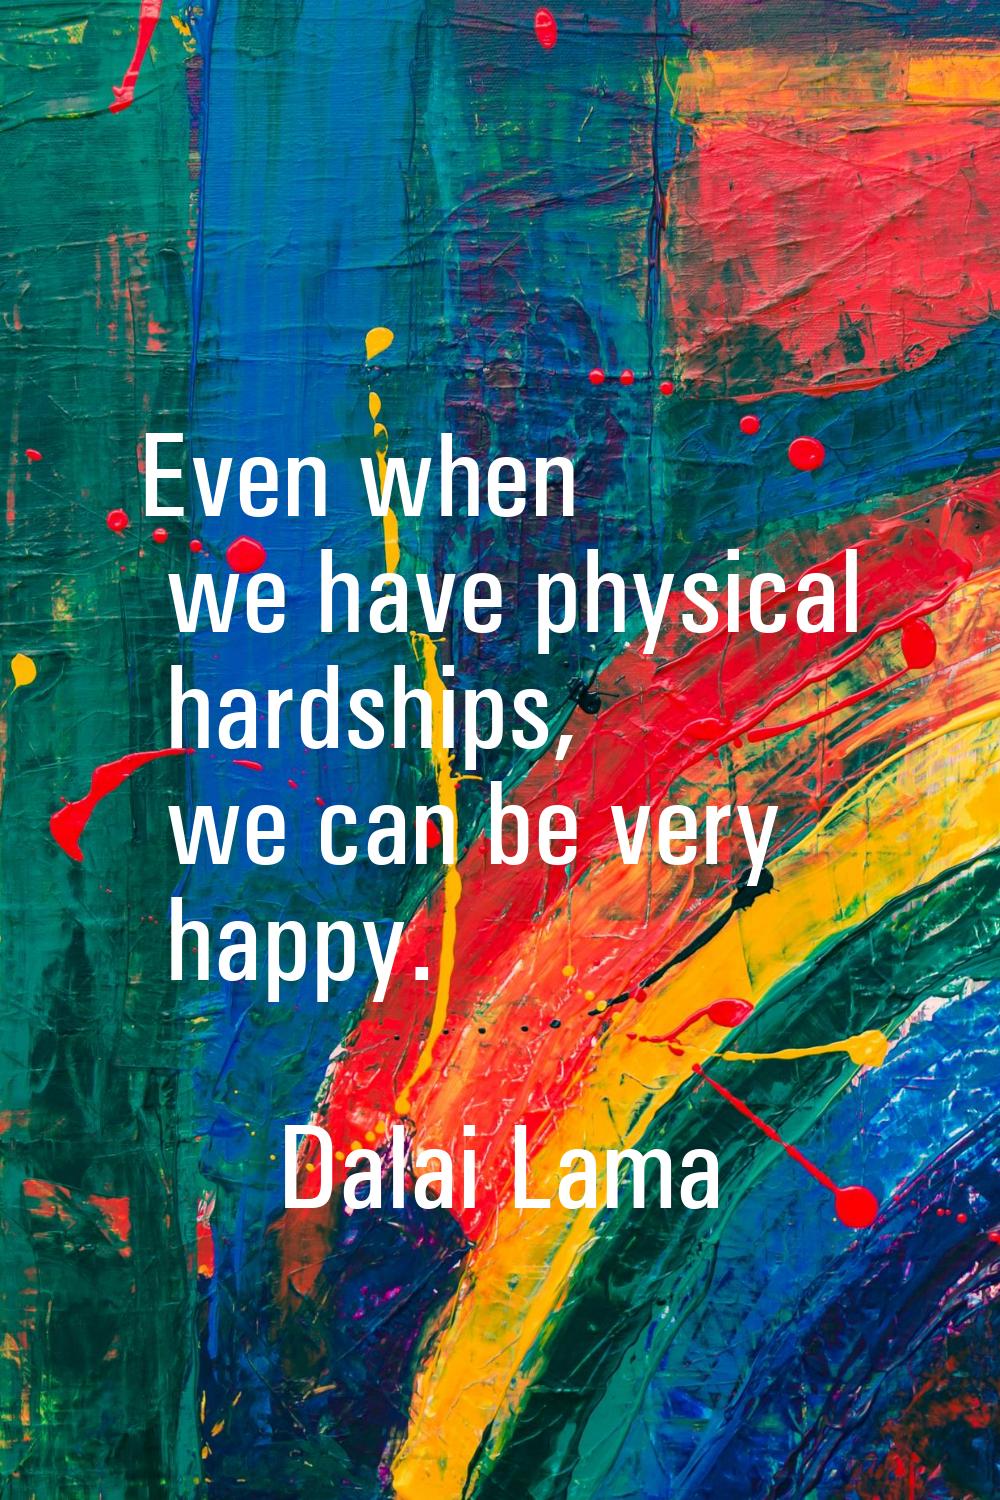 Even when we have physical hardships, we can be very happy.